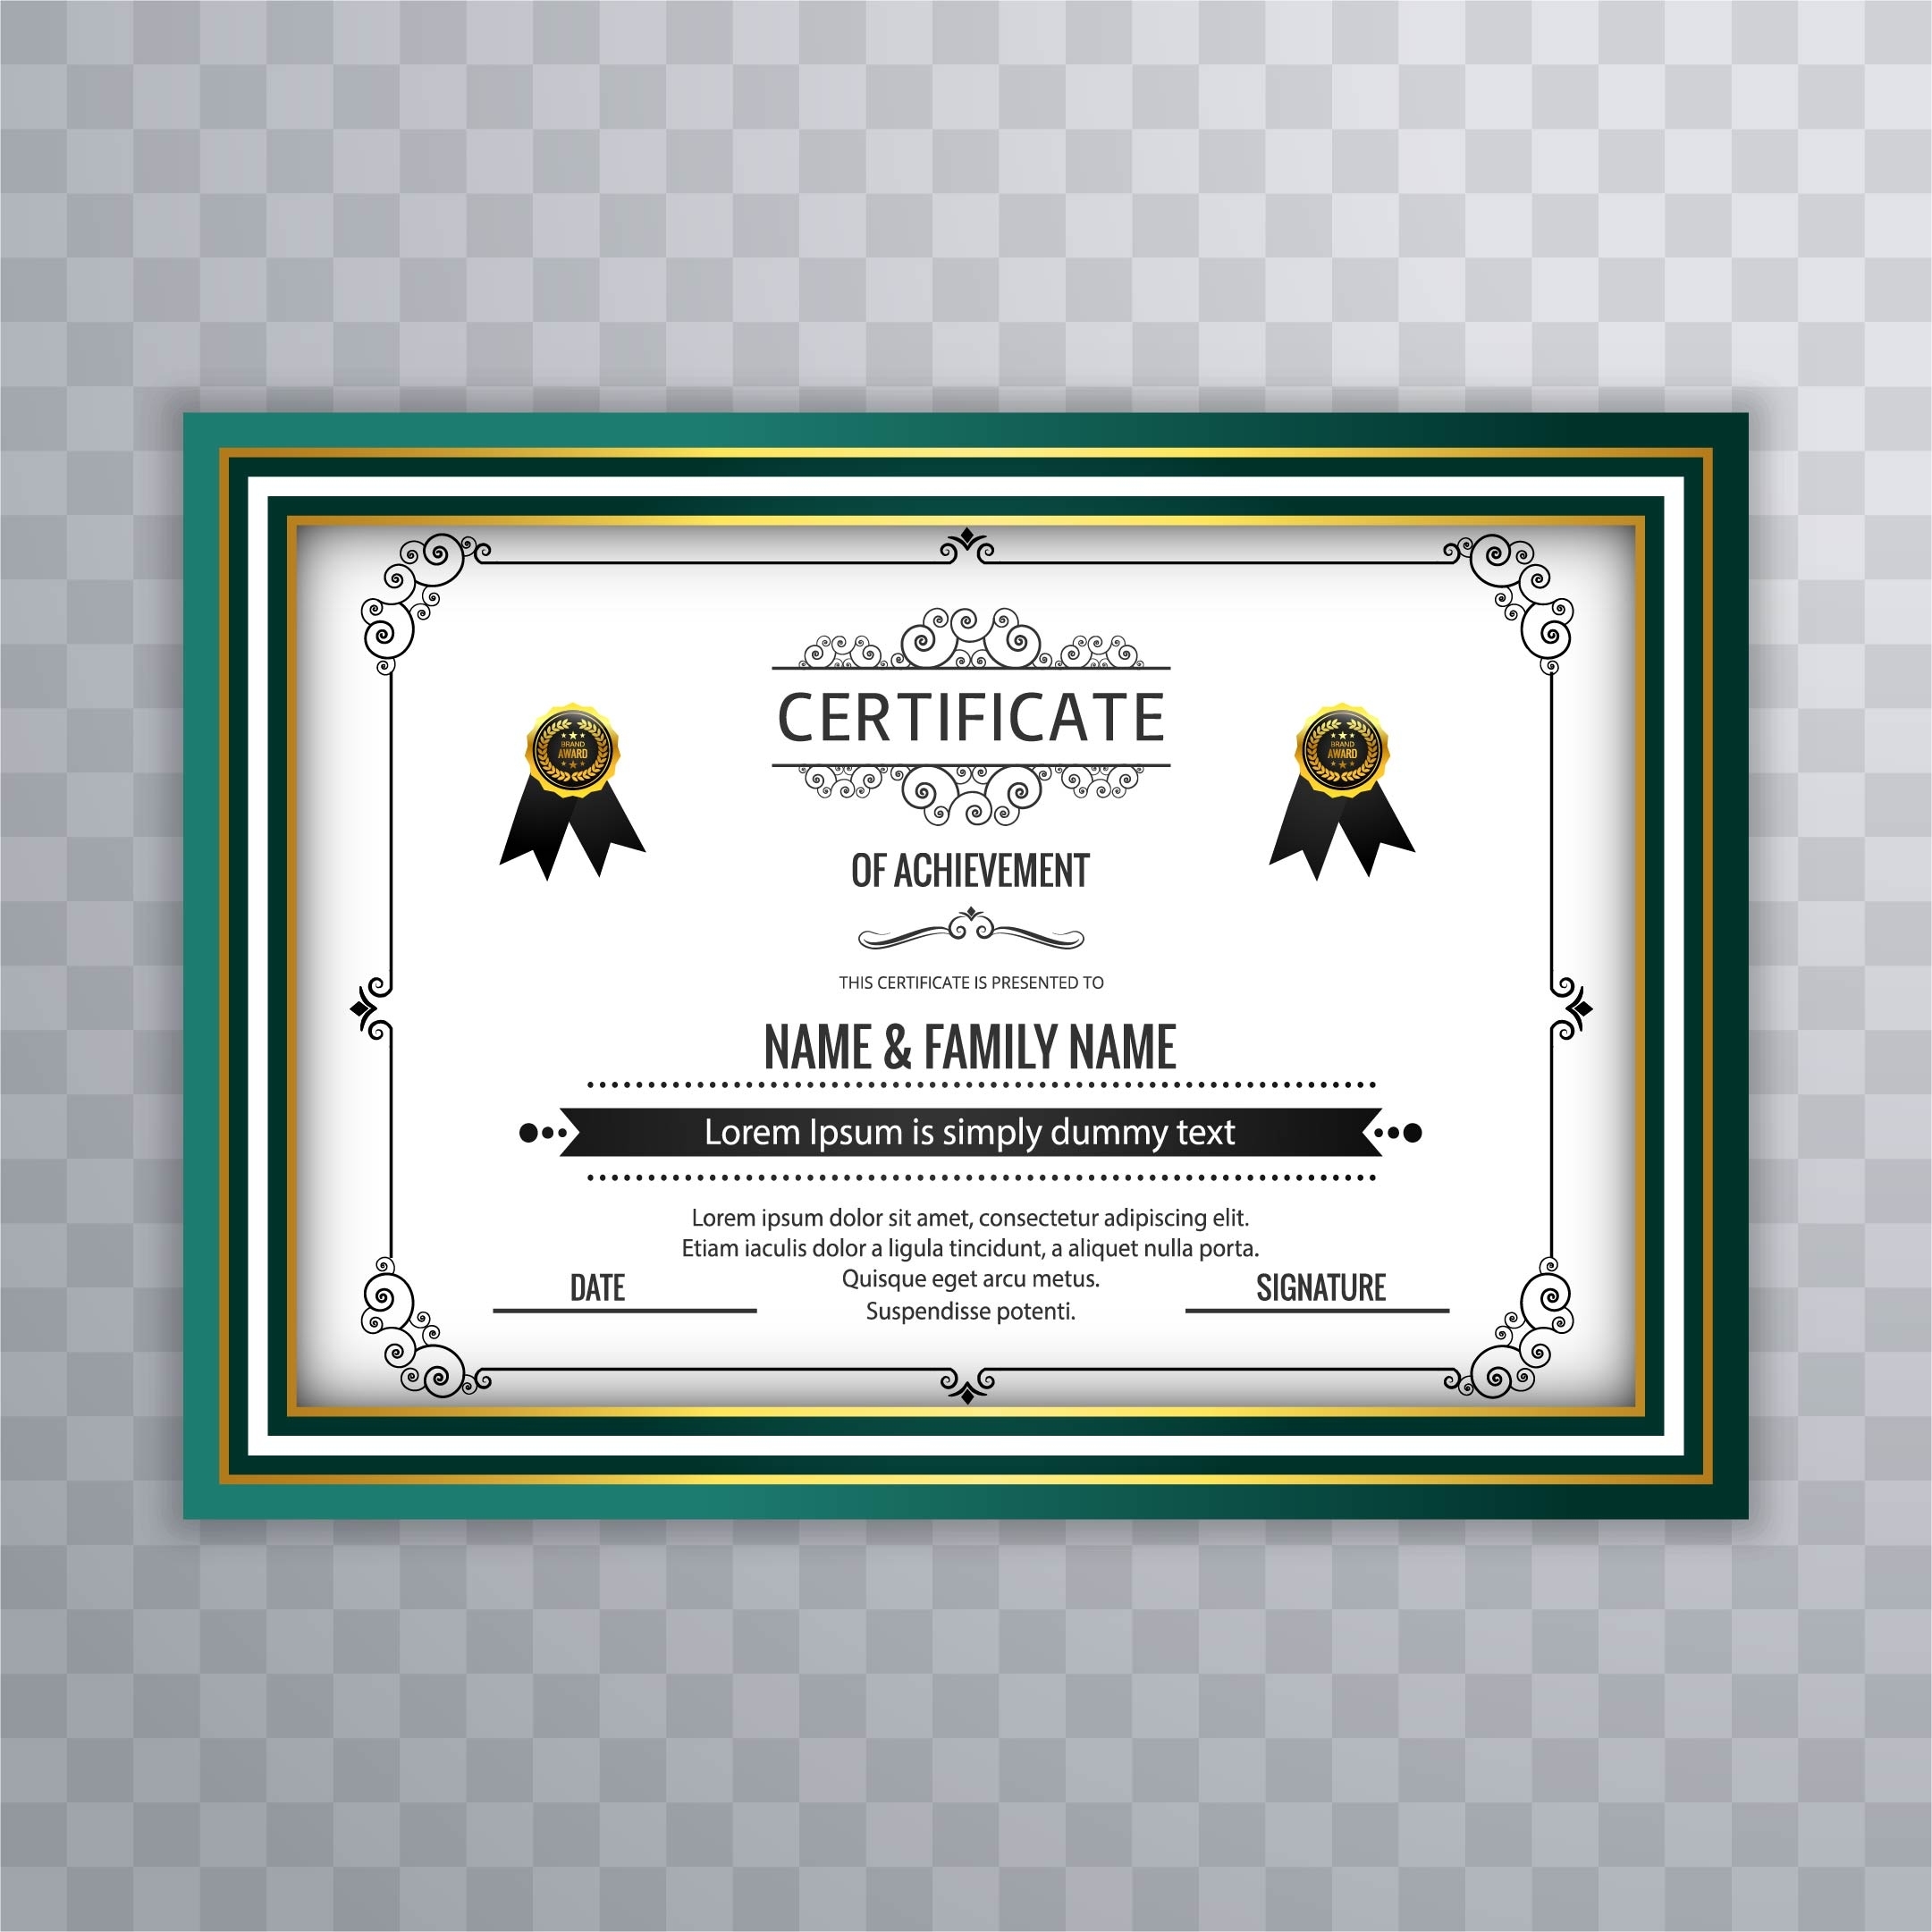 Abstract Beautiful Certificate Template Design Vector 258941 Vector Art Throughout Beautiful Certificate Templates